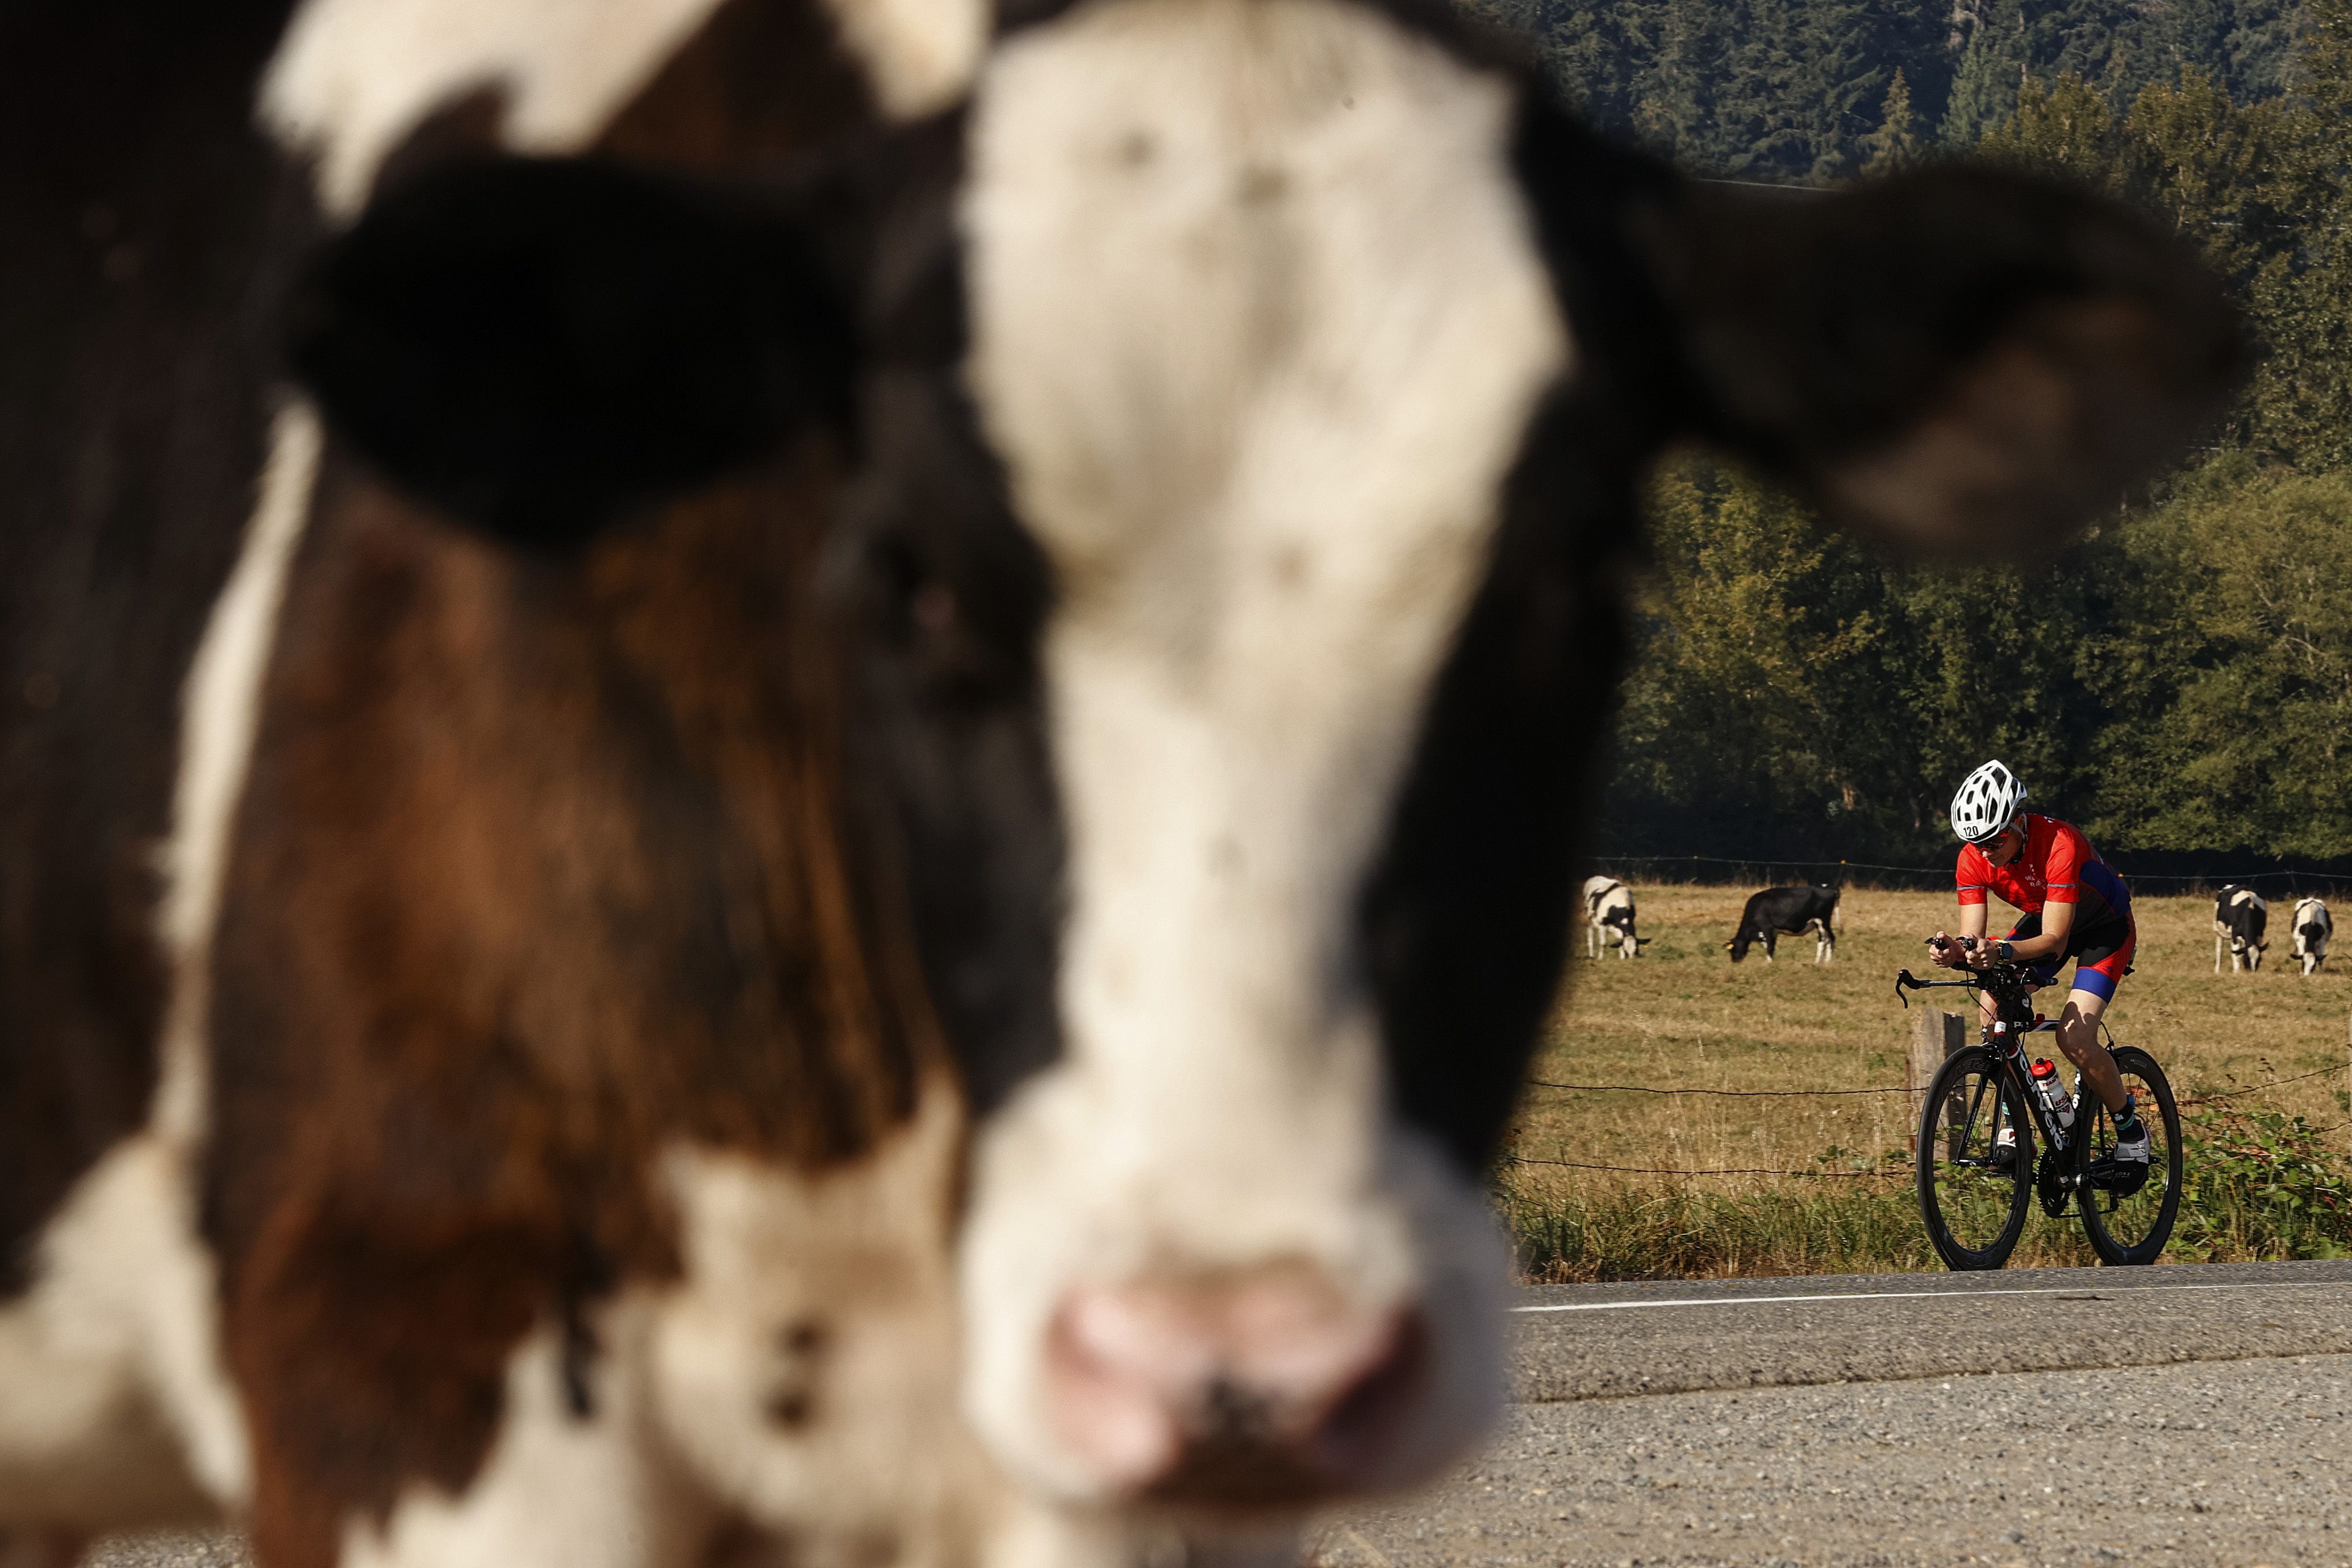 Cow in front of a biker